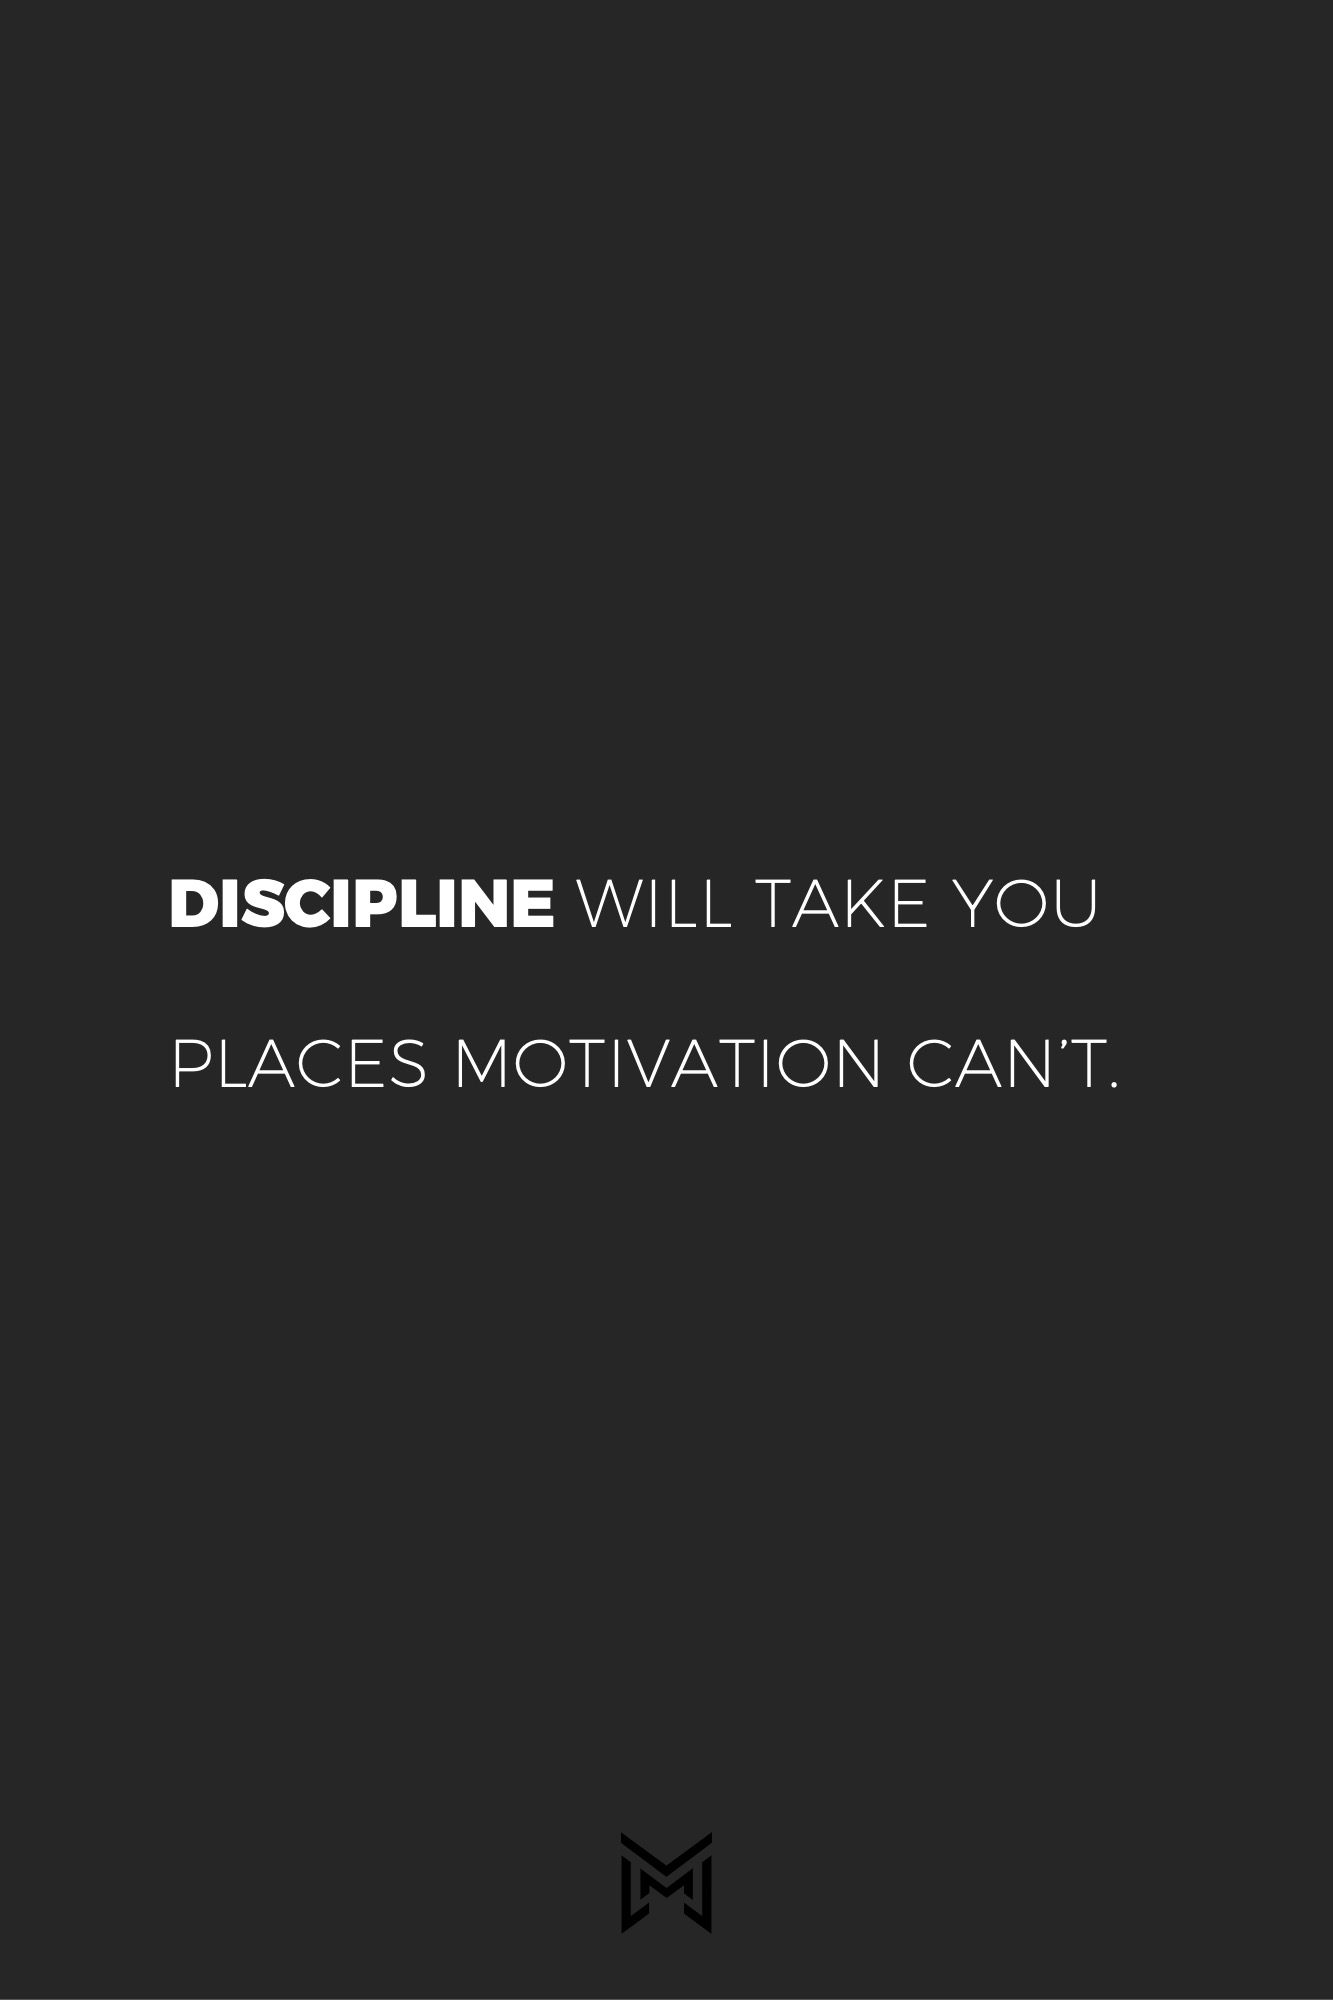 Marketing Stat - Discipline will take you places motivation can't